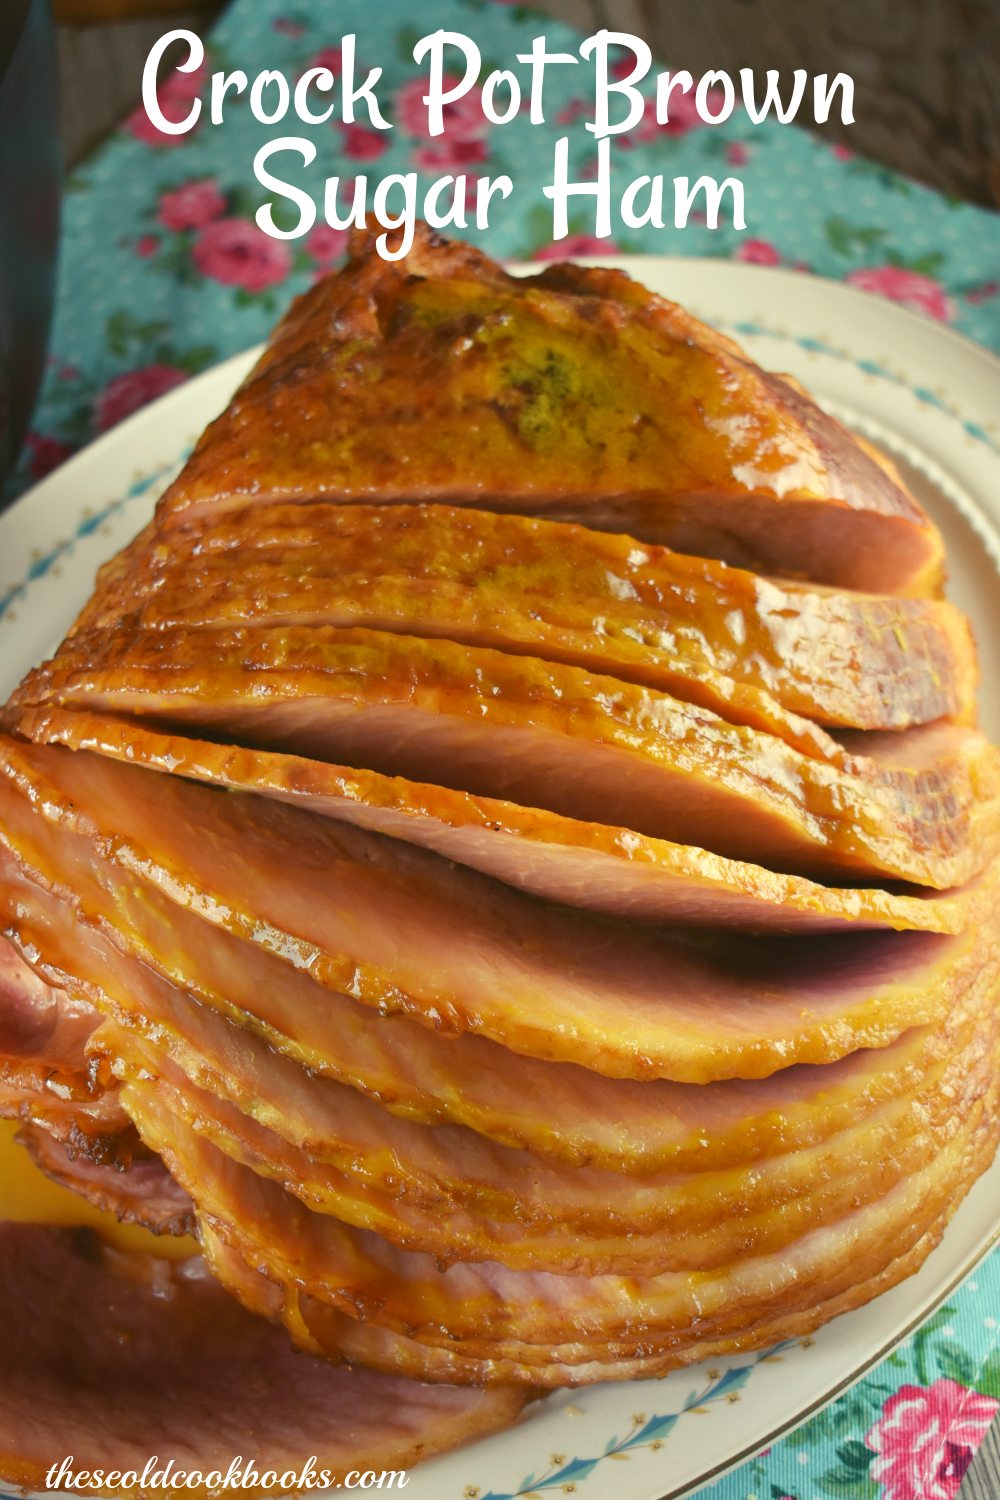 Brown Sugar Crock Pot Spiral Sliced Ham will be your families new favorite way to prepare a holiday ham.  The best part of this family-pleasing recipe is that it only has 3 ingredients---spiral ham, brown sugar and yellow mustard.